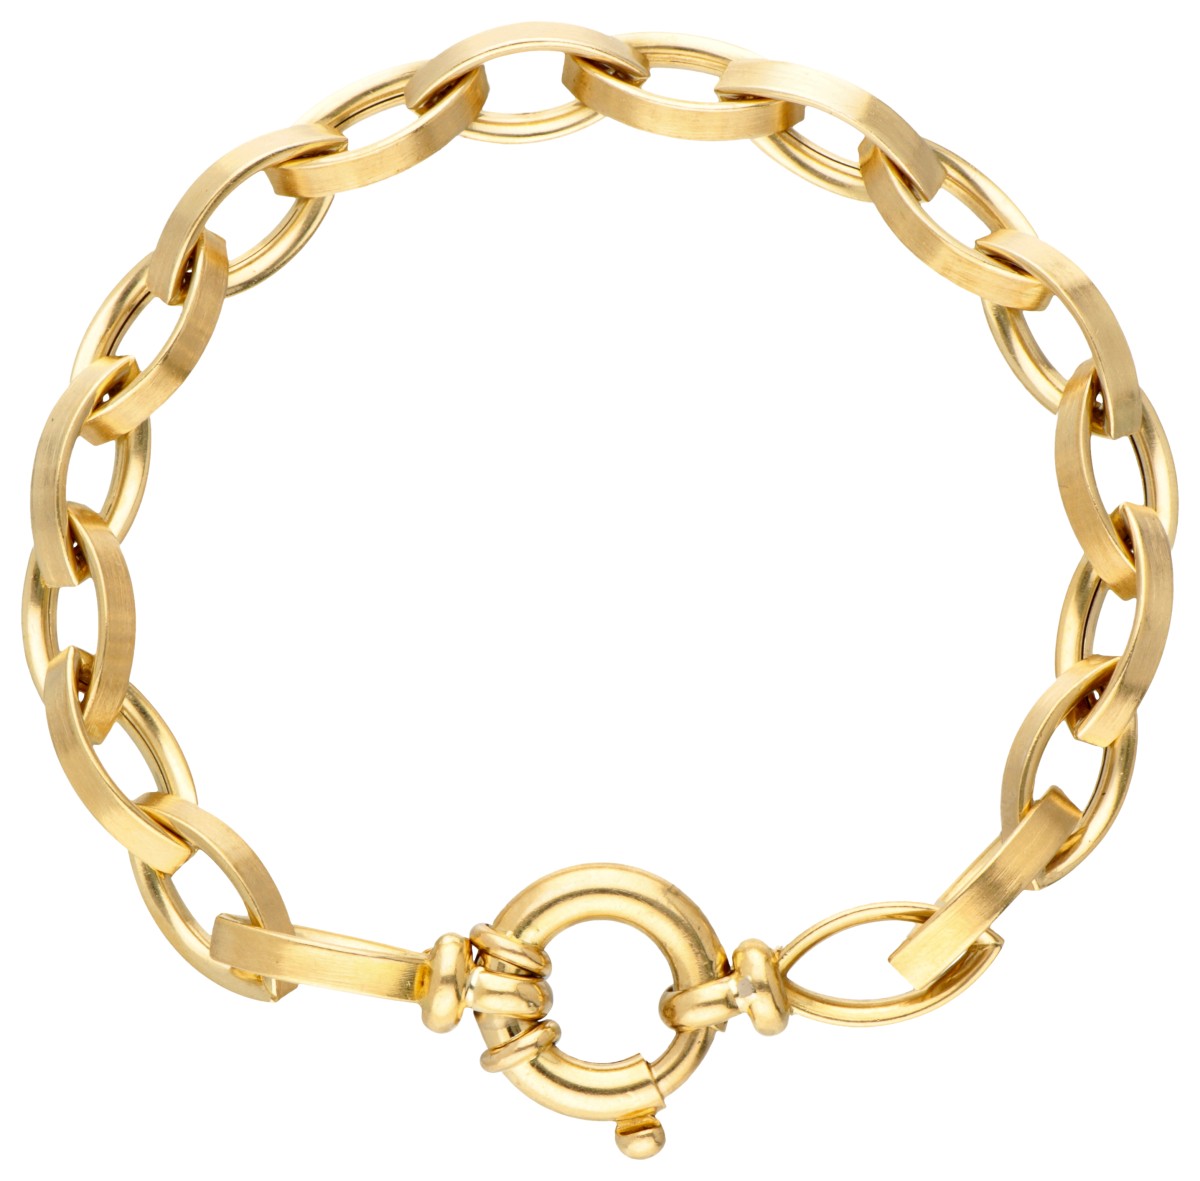 18K. Yellow gold link bracelet with slightly matted links.